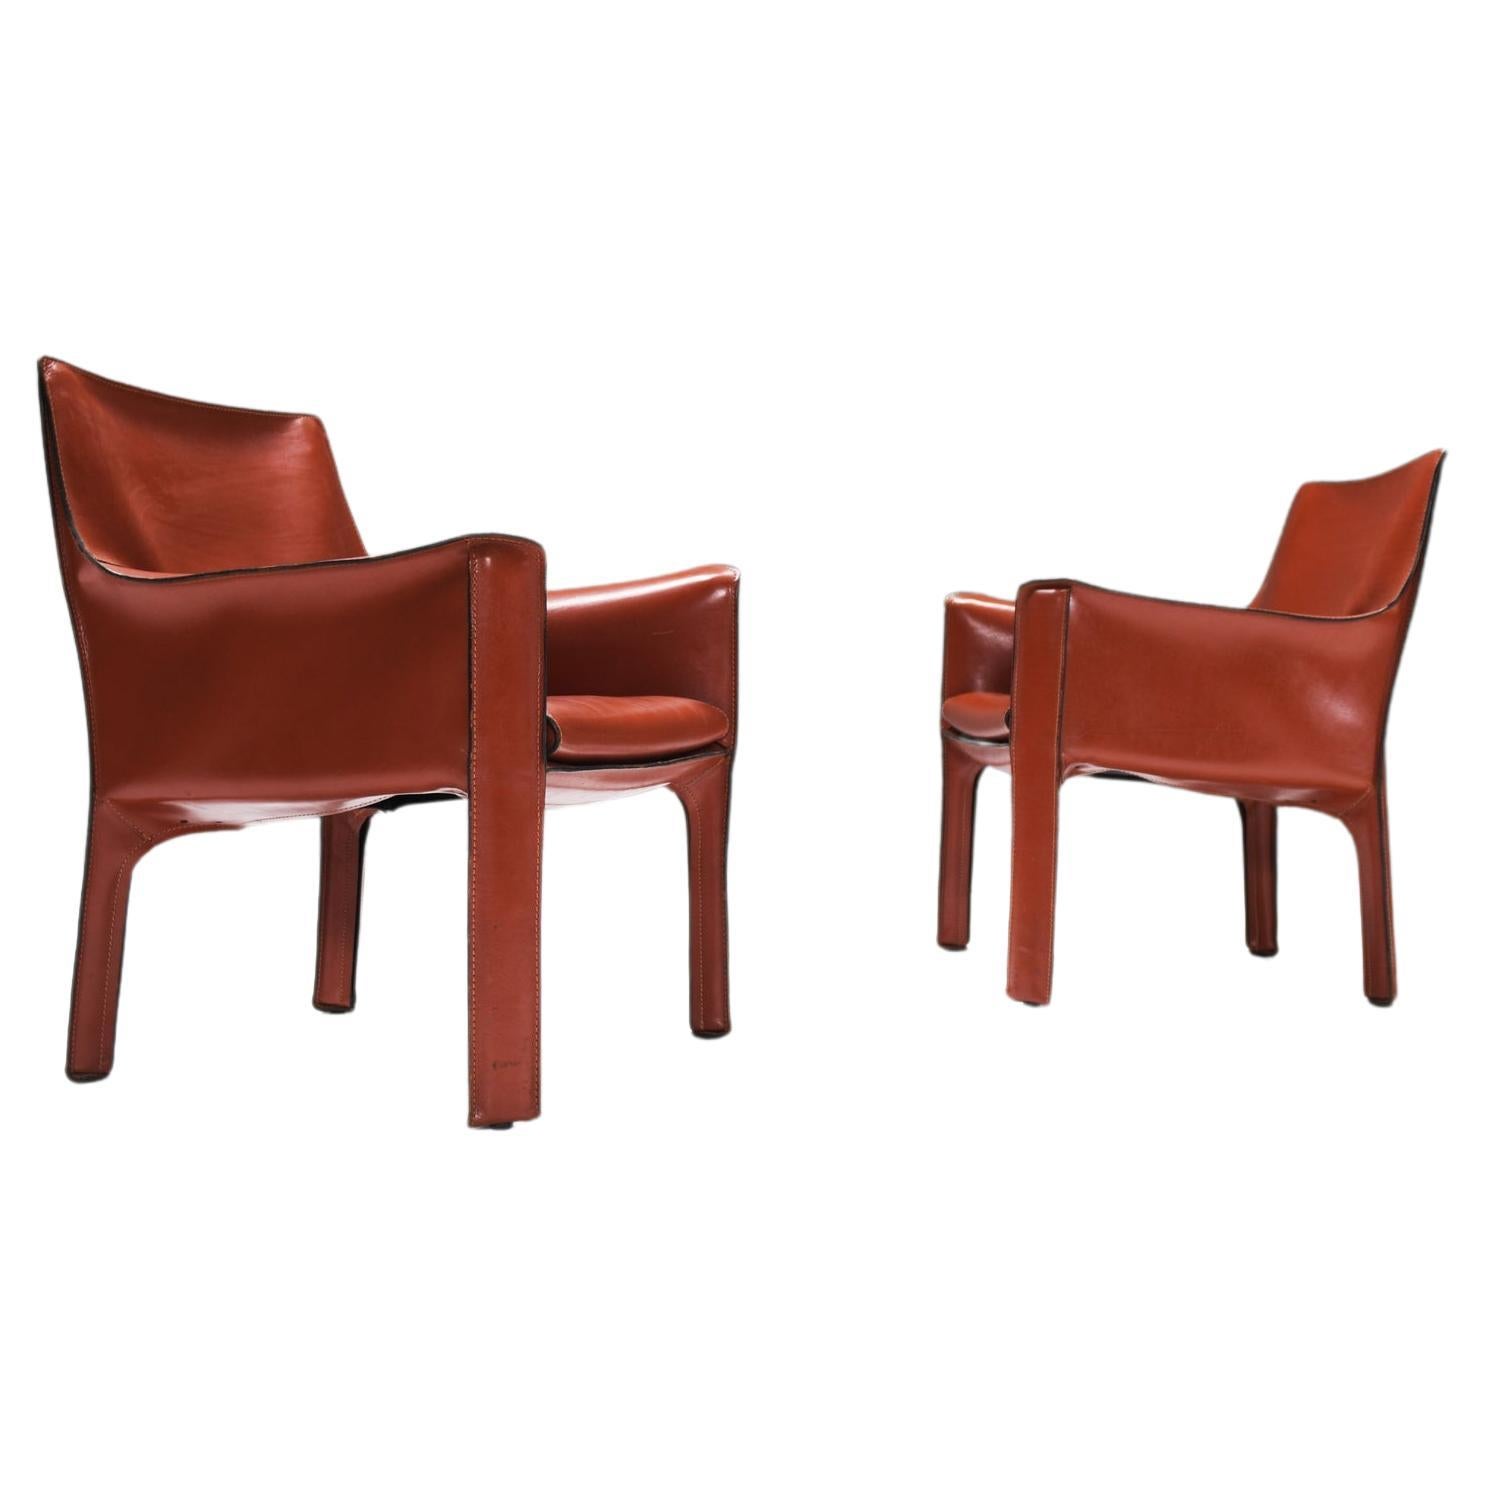 Matching vintage Cab 414 set in burgundy leather by Mario Bellini for Cassina